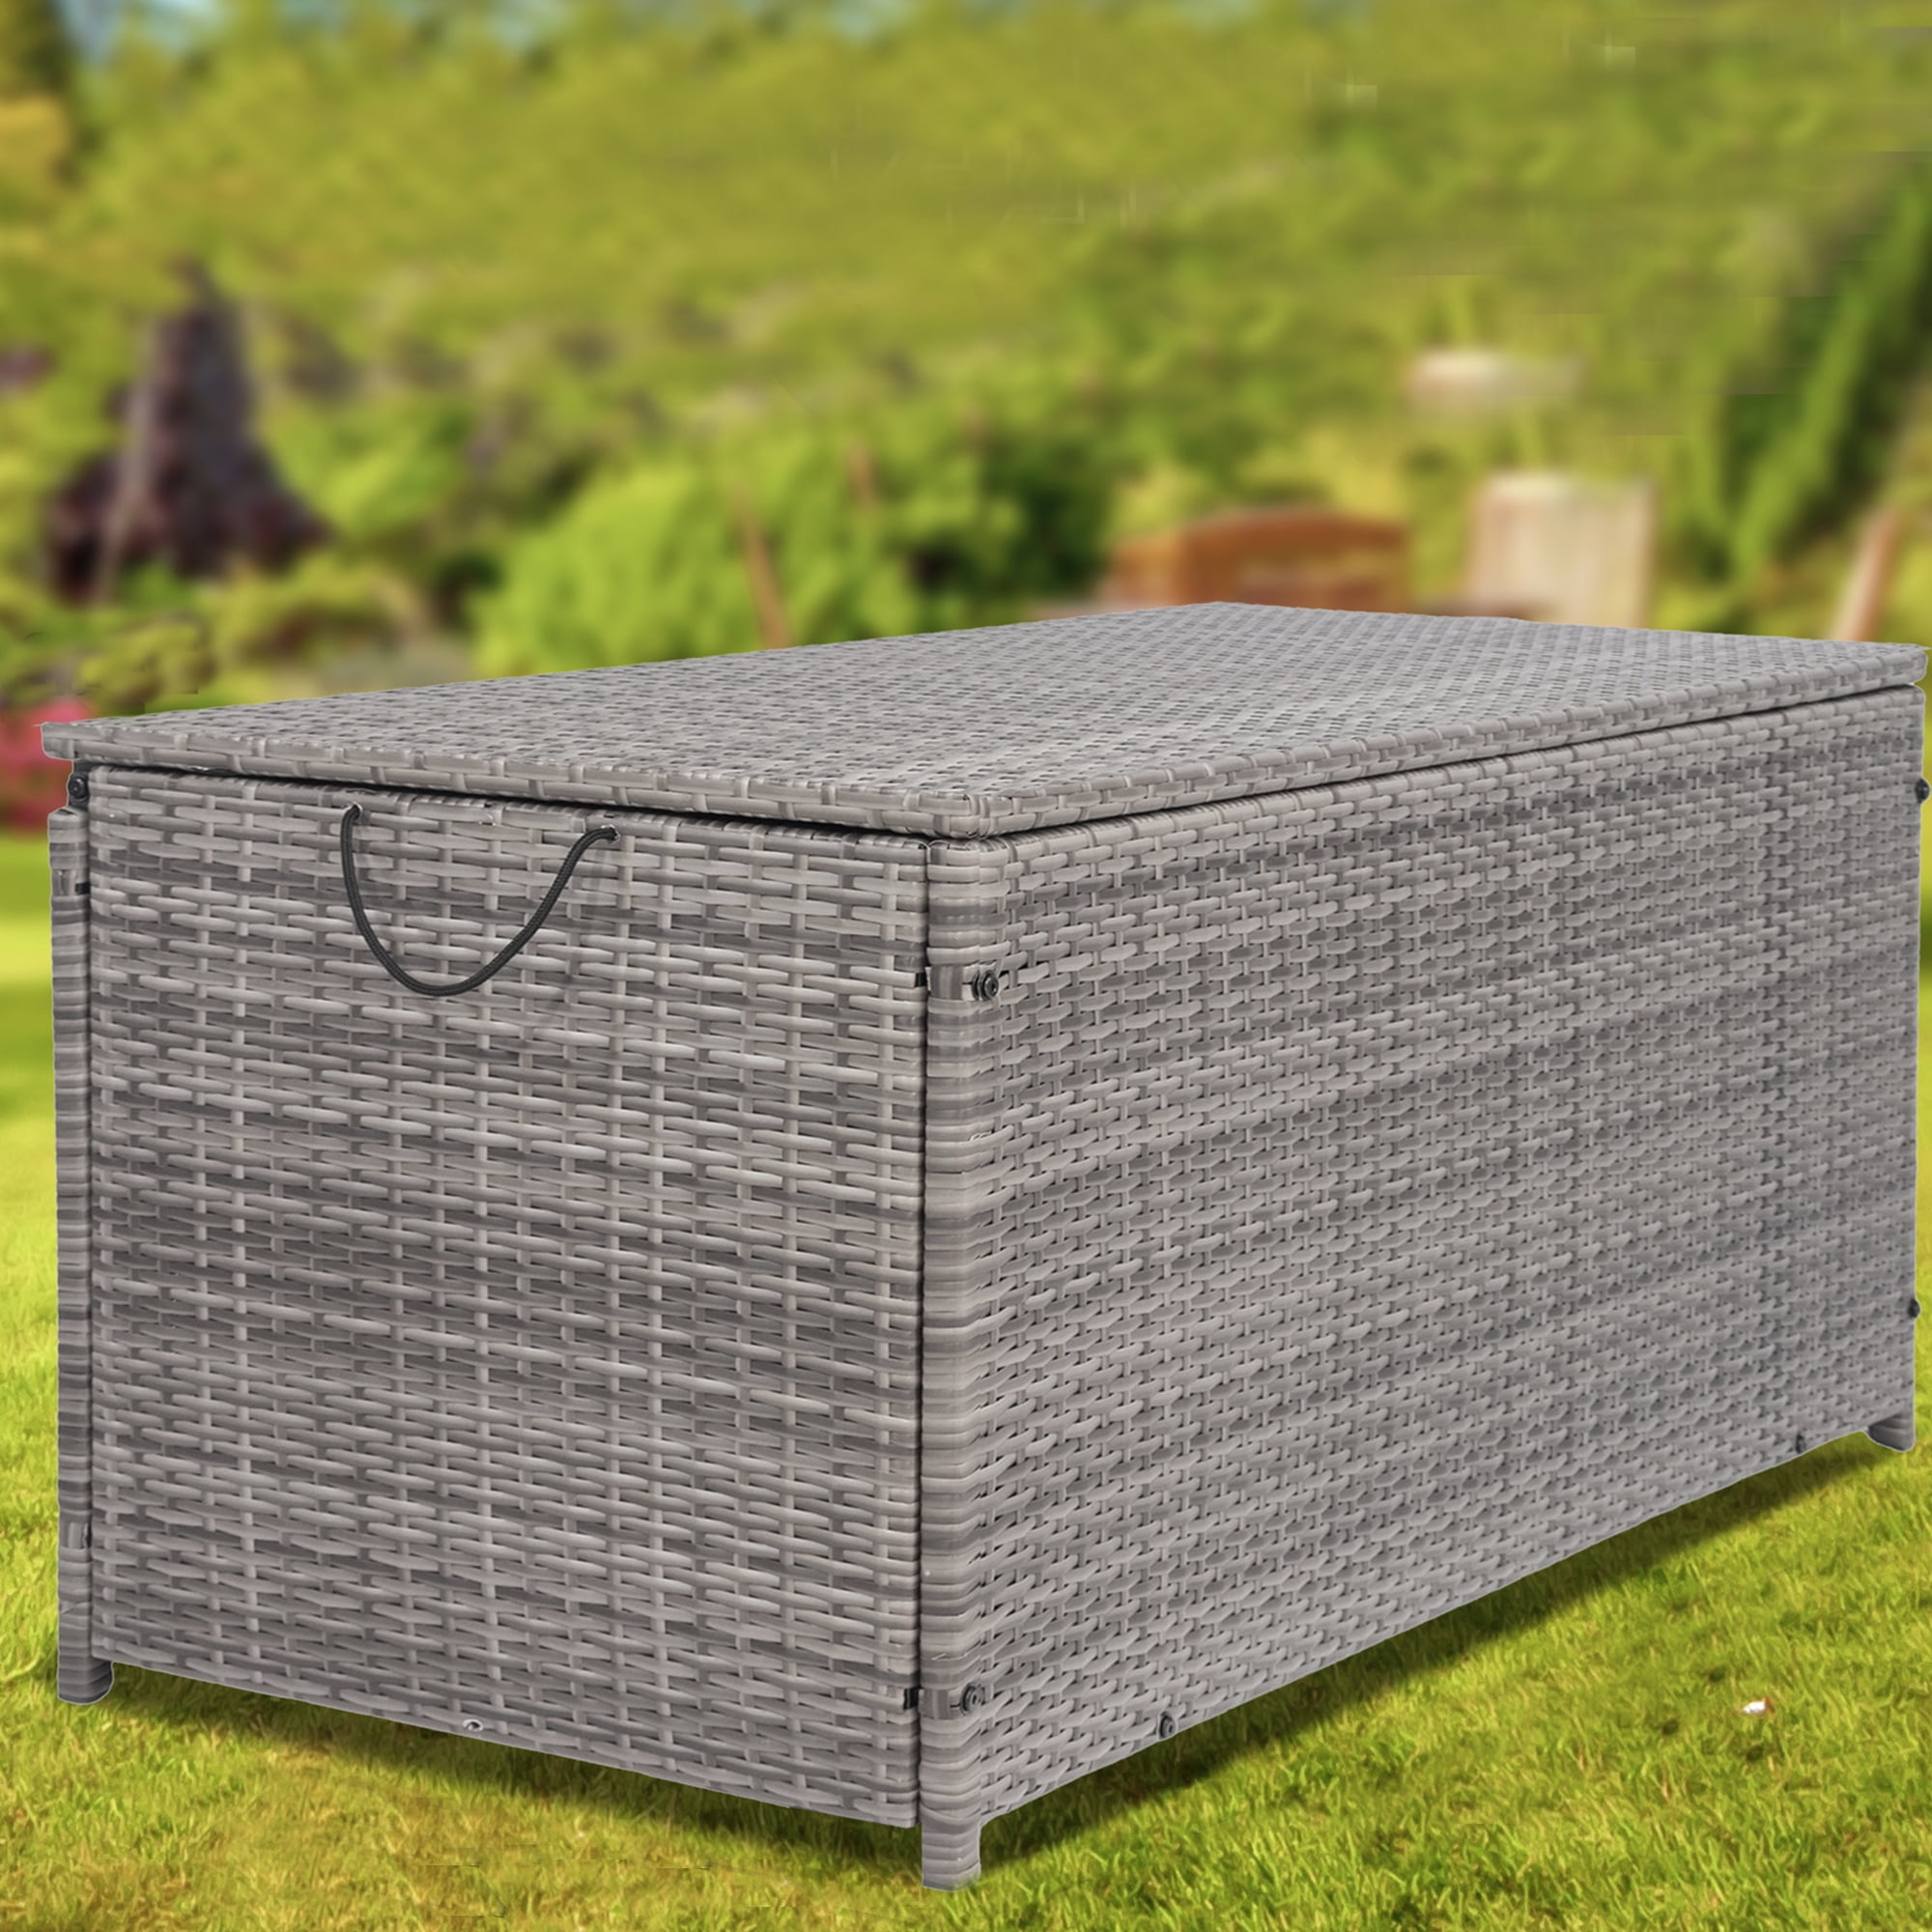 Seizeen Rattan Deck Box for Outside, 113GAL Outdoor Storage Box  w/Waterproof Liner for Pool Accessories, Patio Storage Furniture for Garden  Poolside,